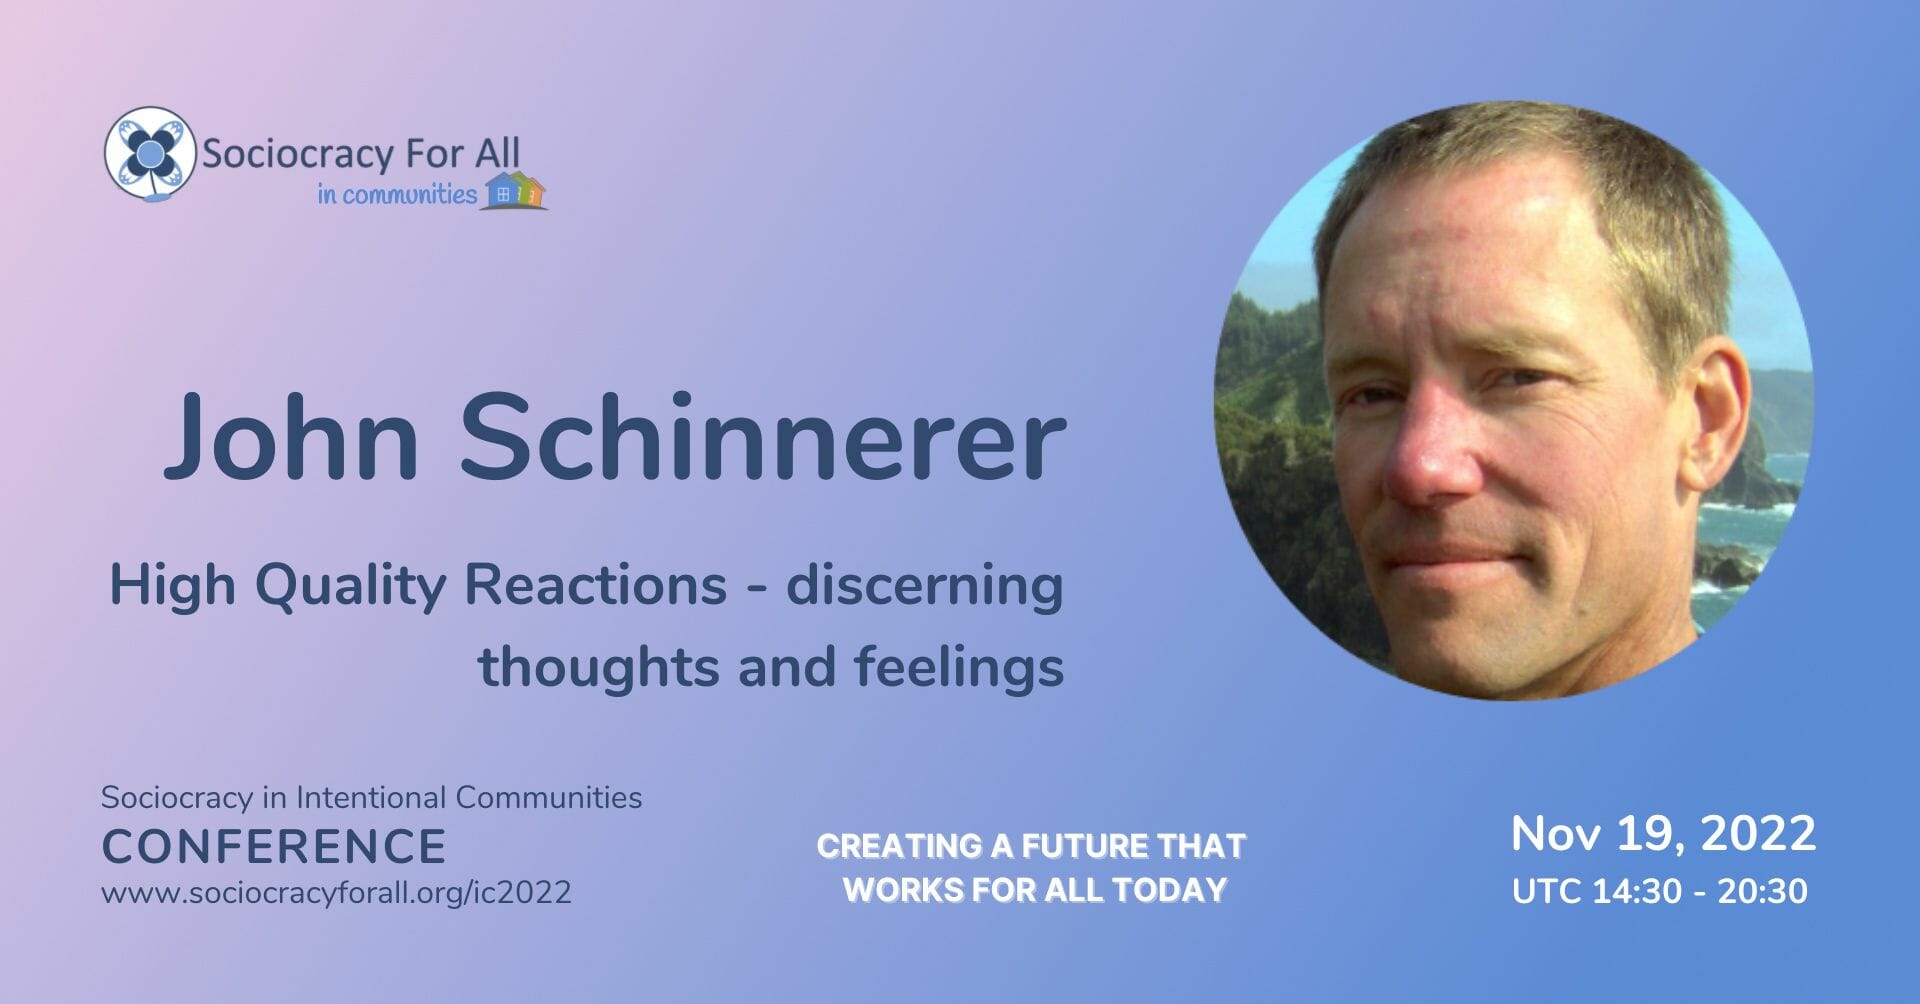 john schinnerer sociocracy in intentional communities conference 2022 - - Sociocracy For All